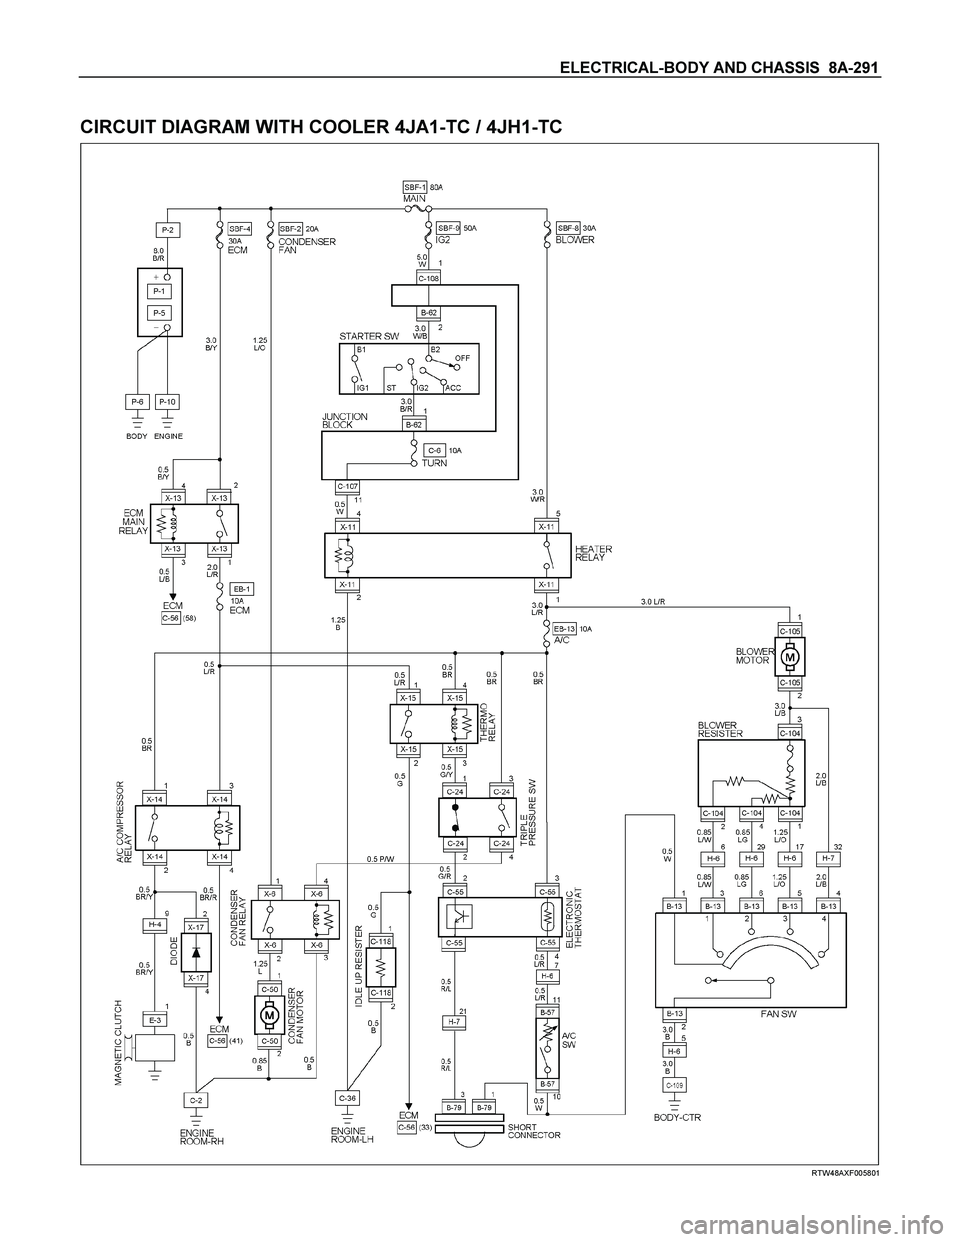 ISUZU TF SERIES 2004  Workshop Manual ELECTRICAL-BODY AND CHASSIS  8A-291 
 
CIRCUIT DIAGRAM WITH COOLER 4JA1-TC / 4JH1-TC 
  
 
 
 
RTW48AXF005801  